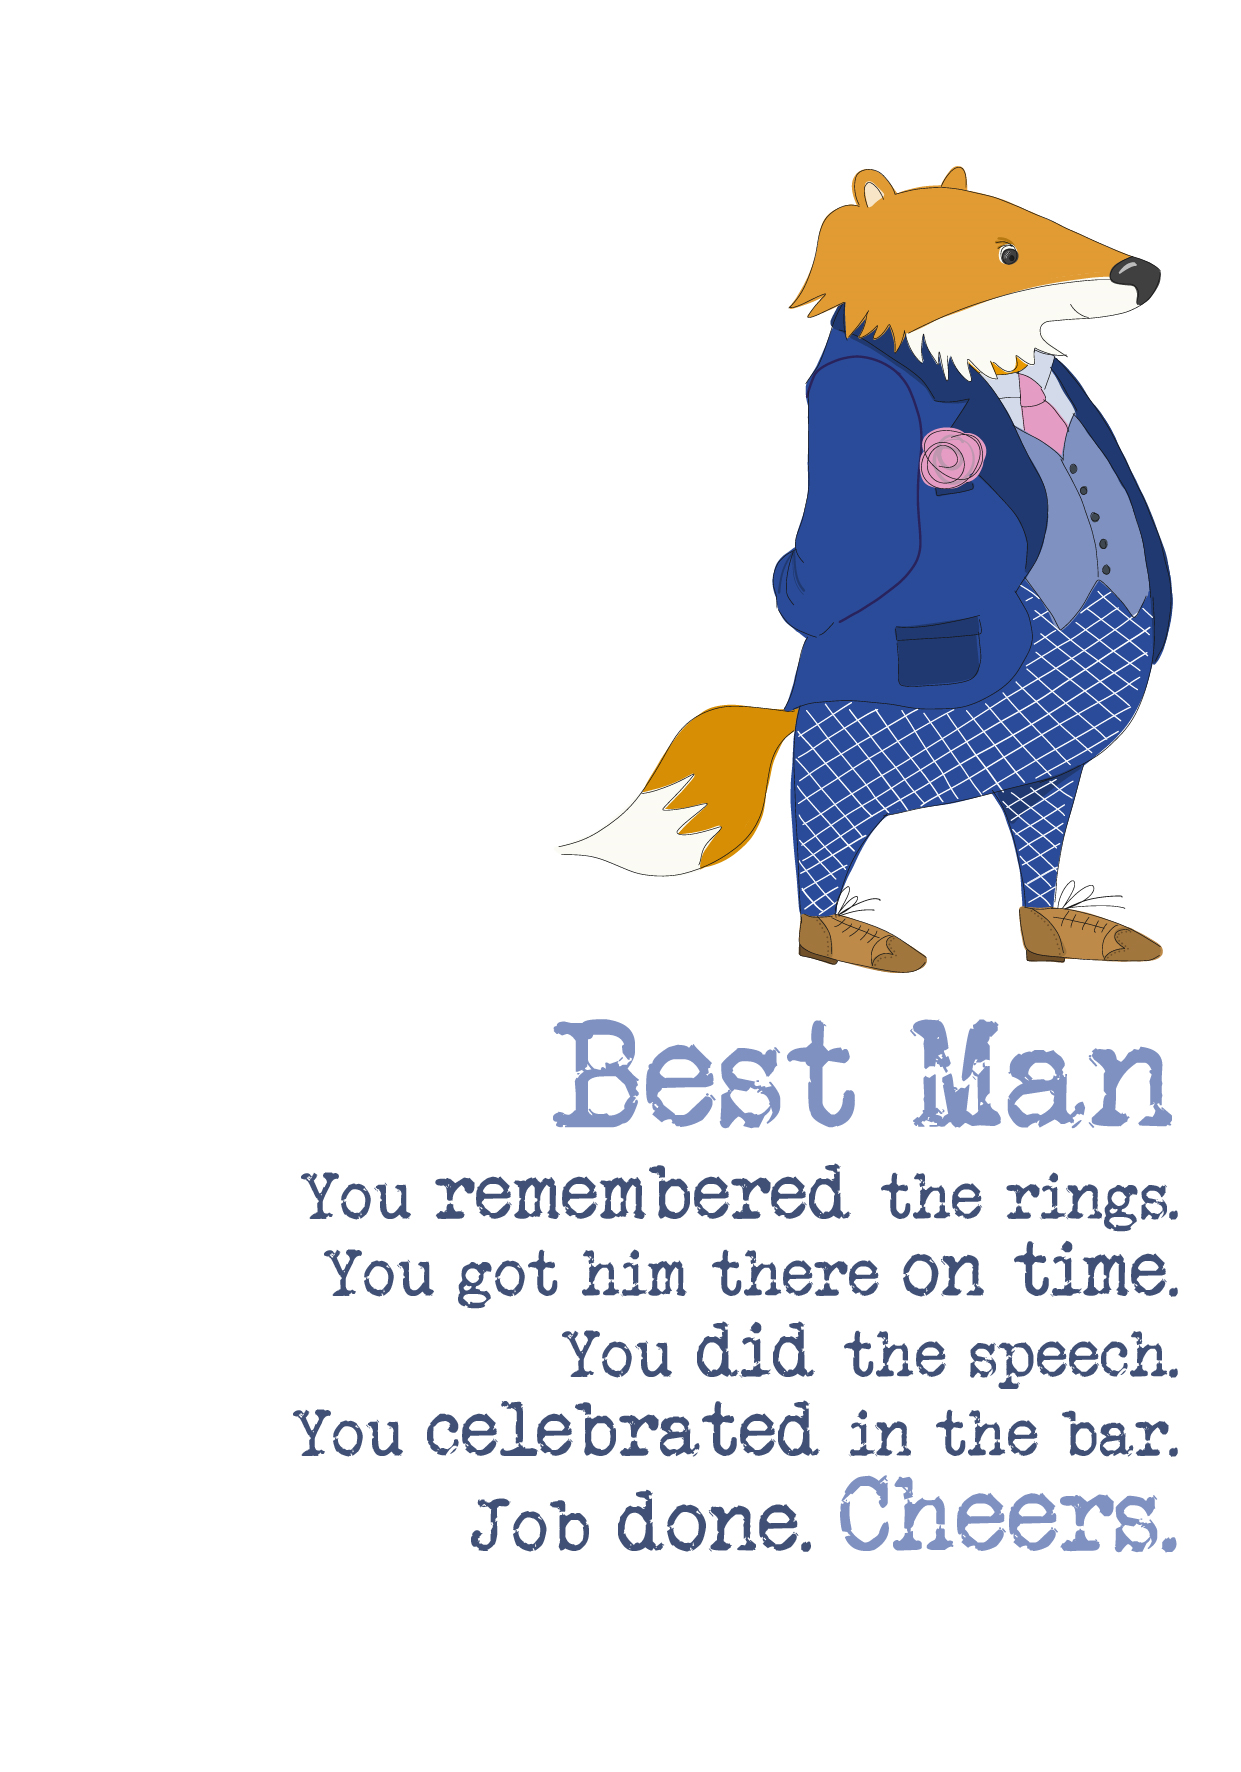 Best Man Thank You Sparkle Finished Greeting Card